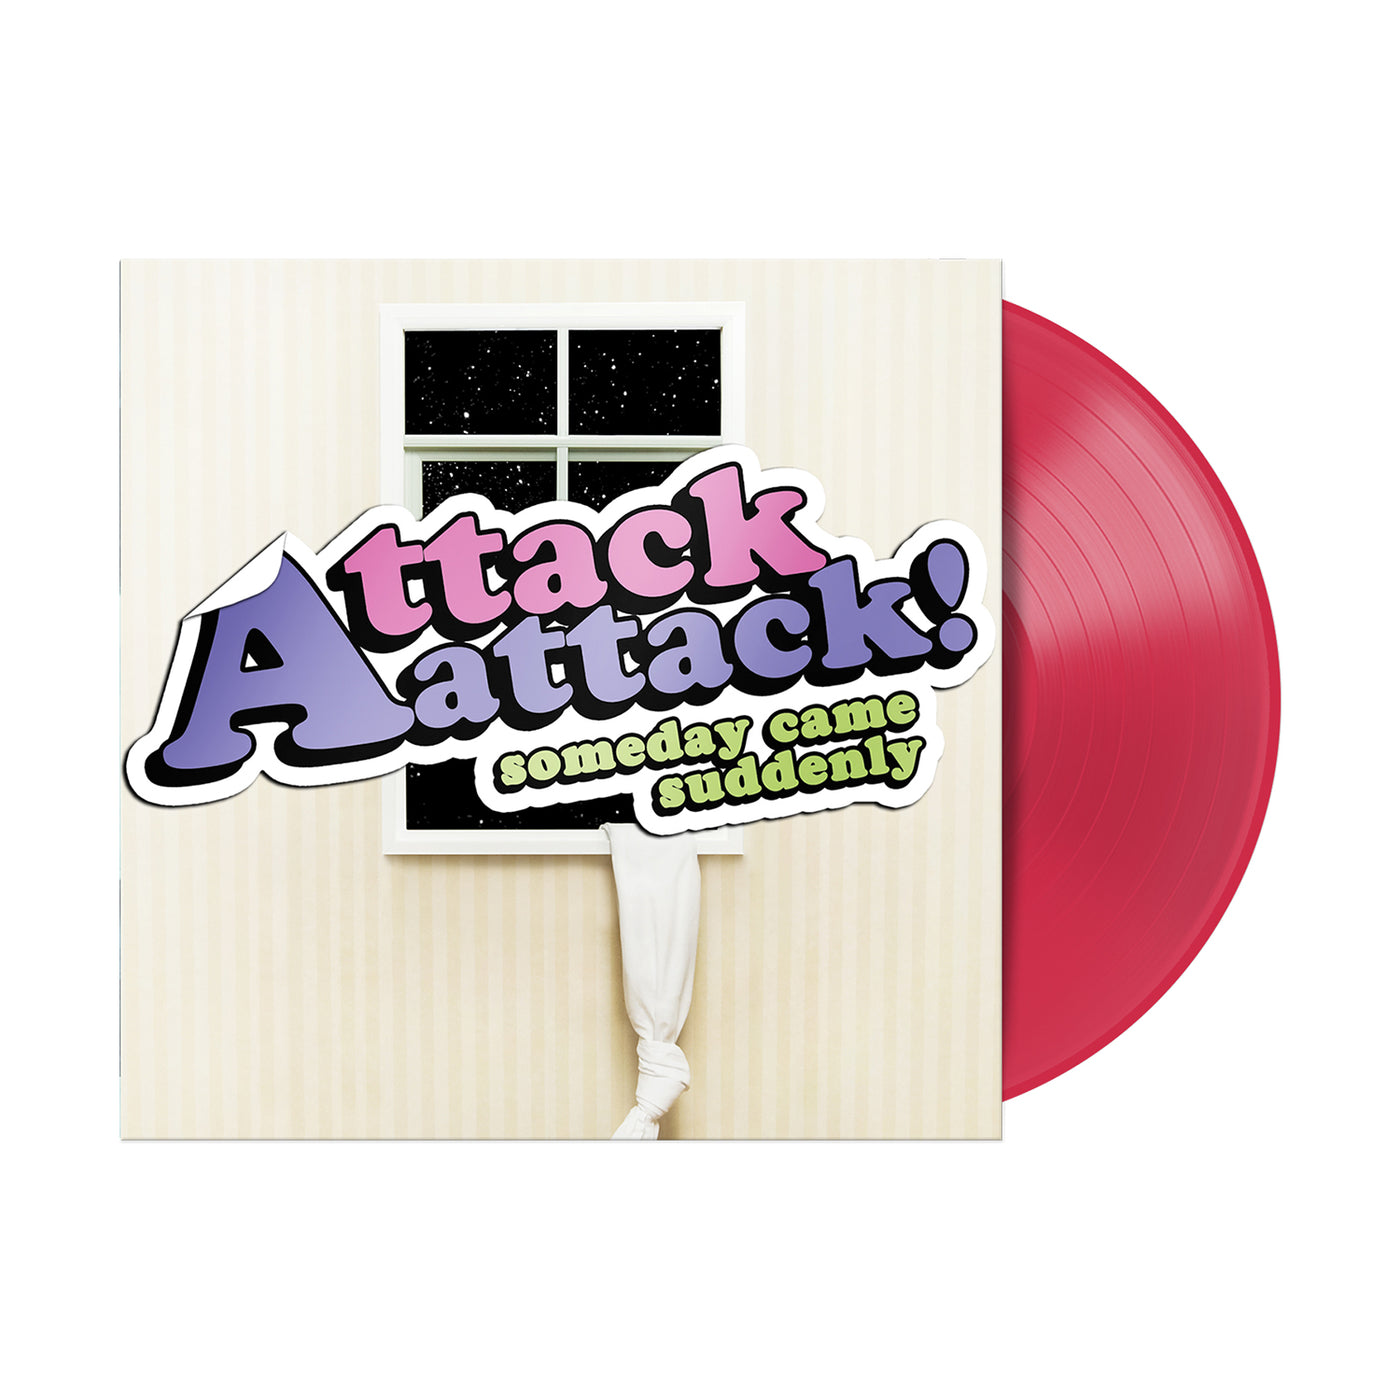 Someday Came Suddenly Neon Pink Vinyl LP